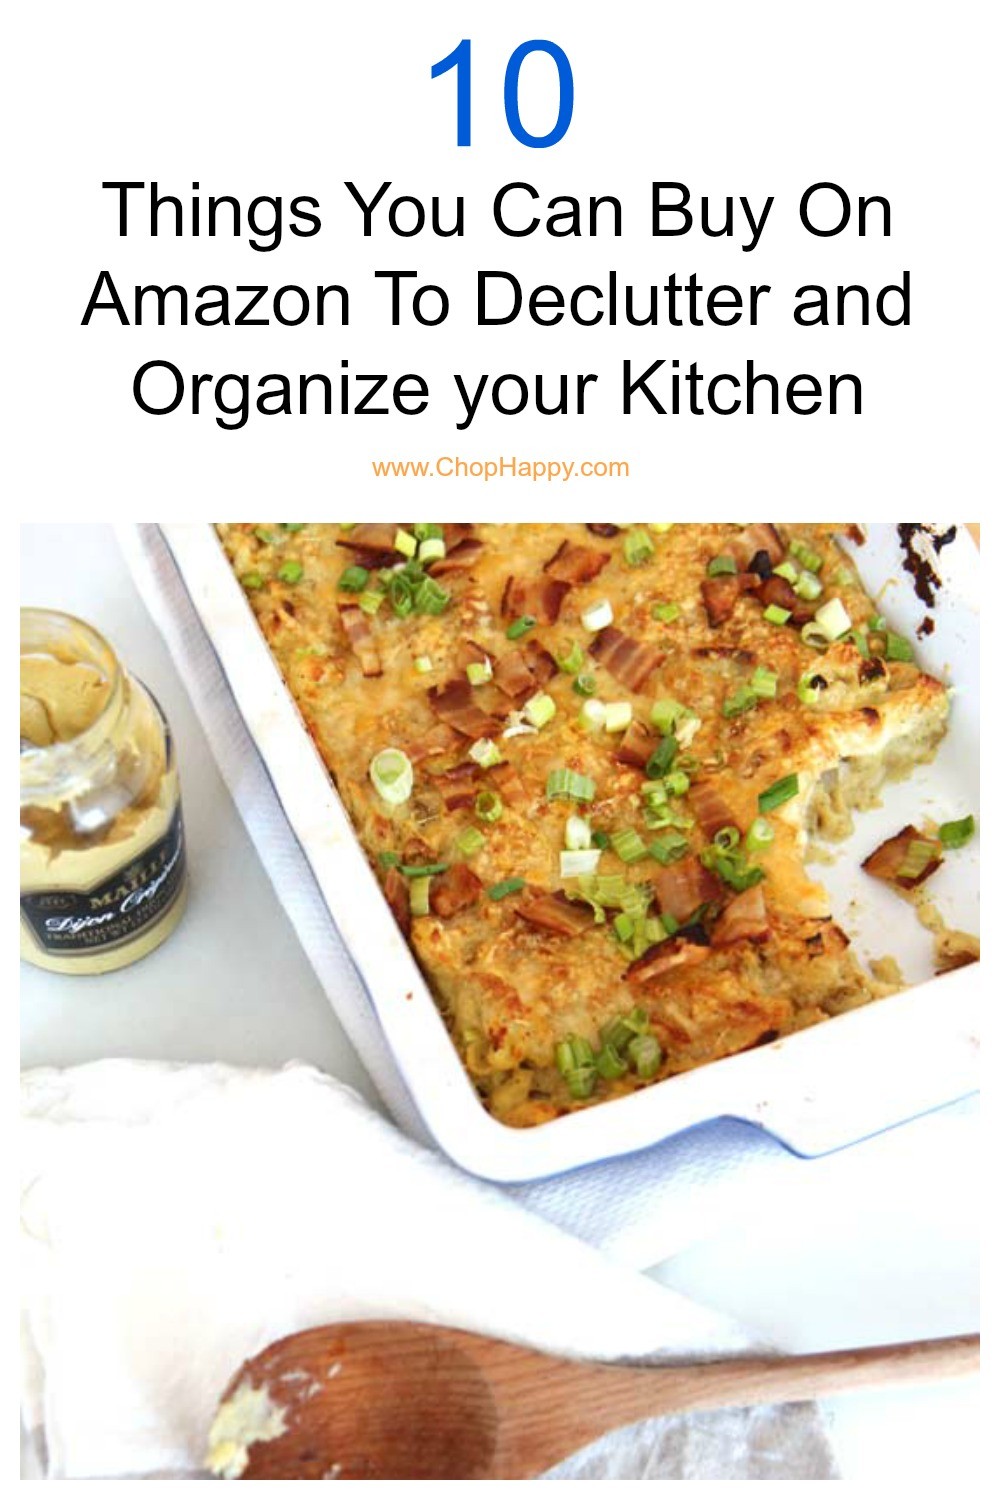 10 Things You Can Buy On Amazon To Declutter and Organize your Kitchen